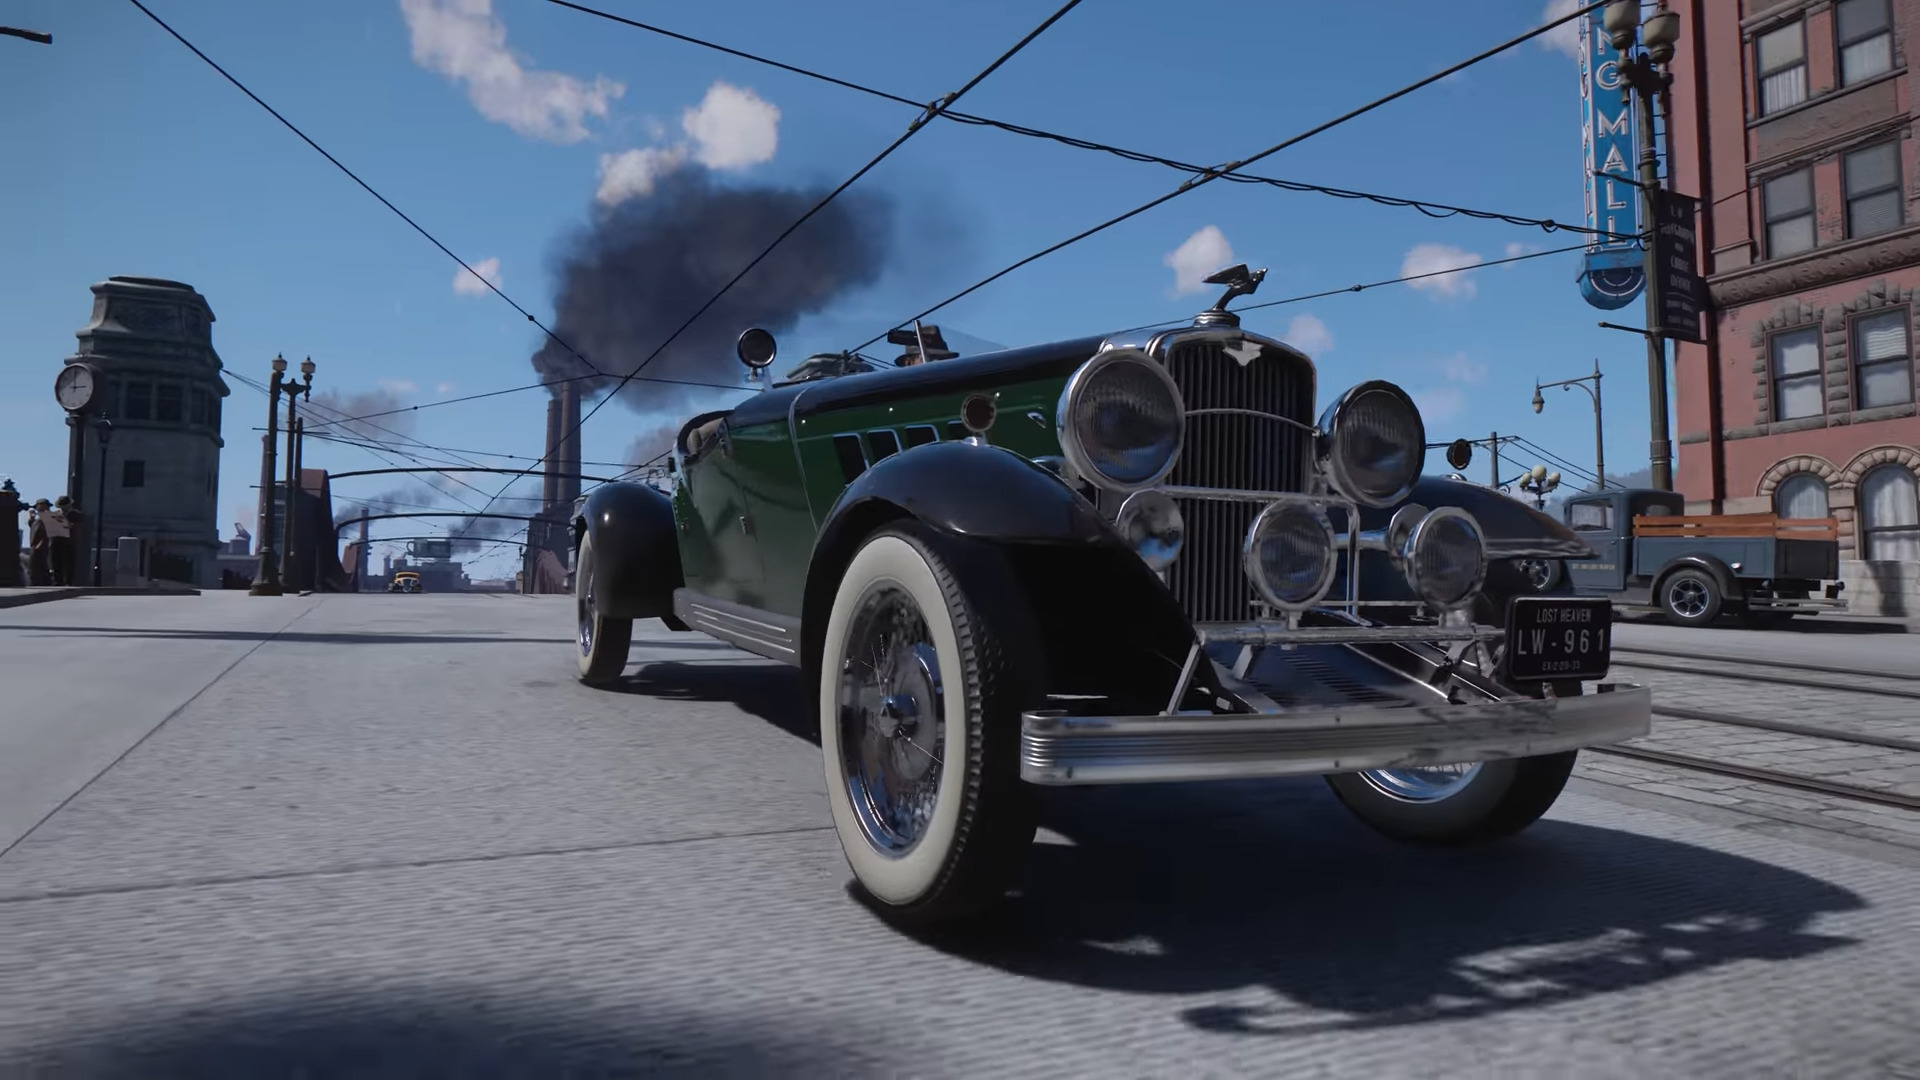 Mafia: Definitive Edition Gets An Official Gameplay Reveal Two Months Before Release